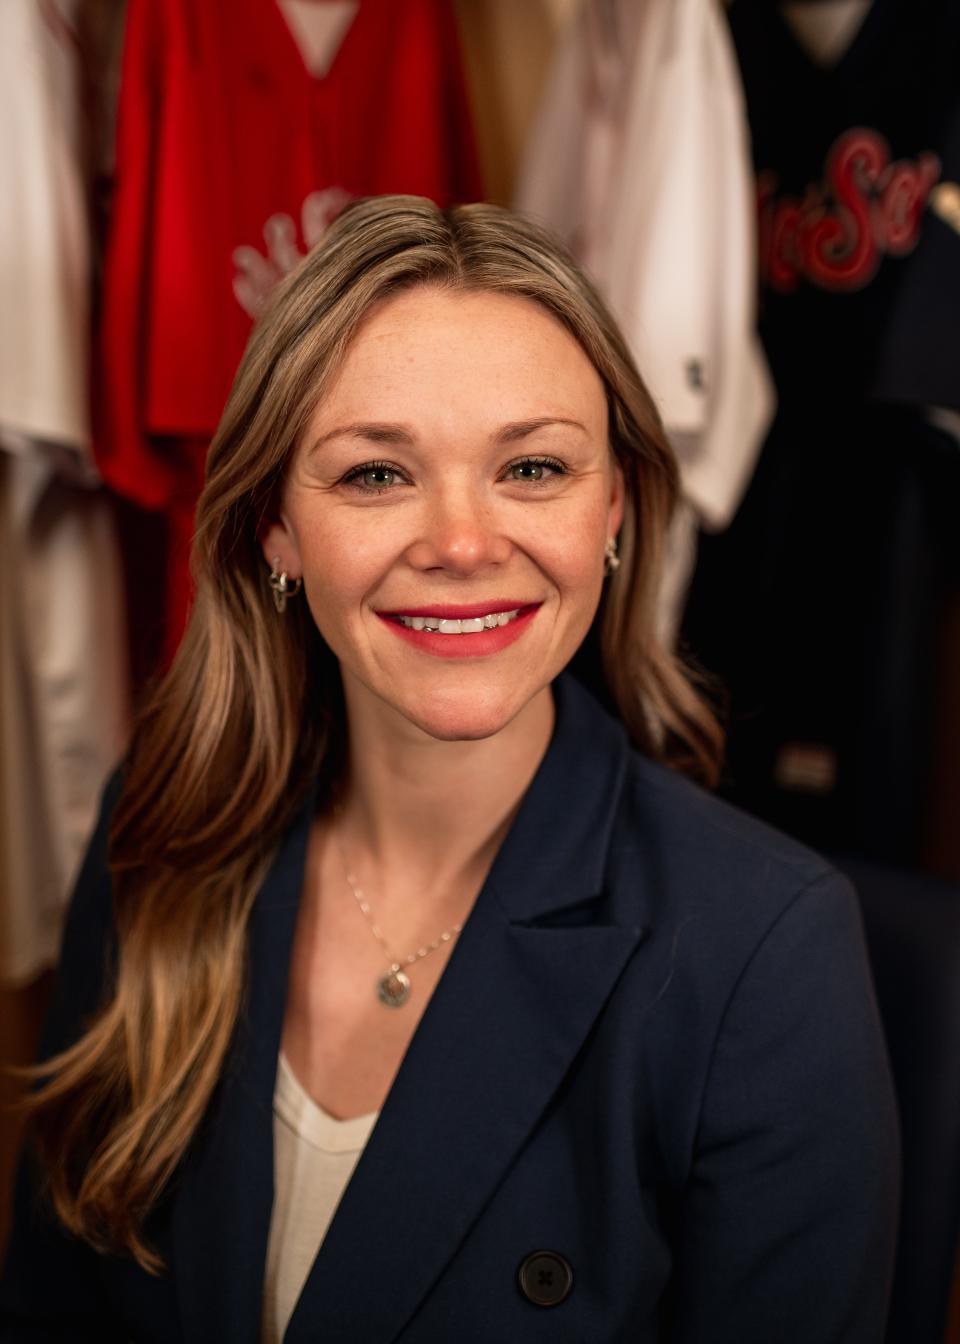 The Worcester Red Sox announced Wednesday that Brooke Cooper has been named the new executive vice president and general manager of the Triple-A club.